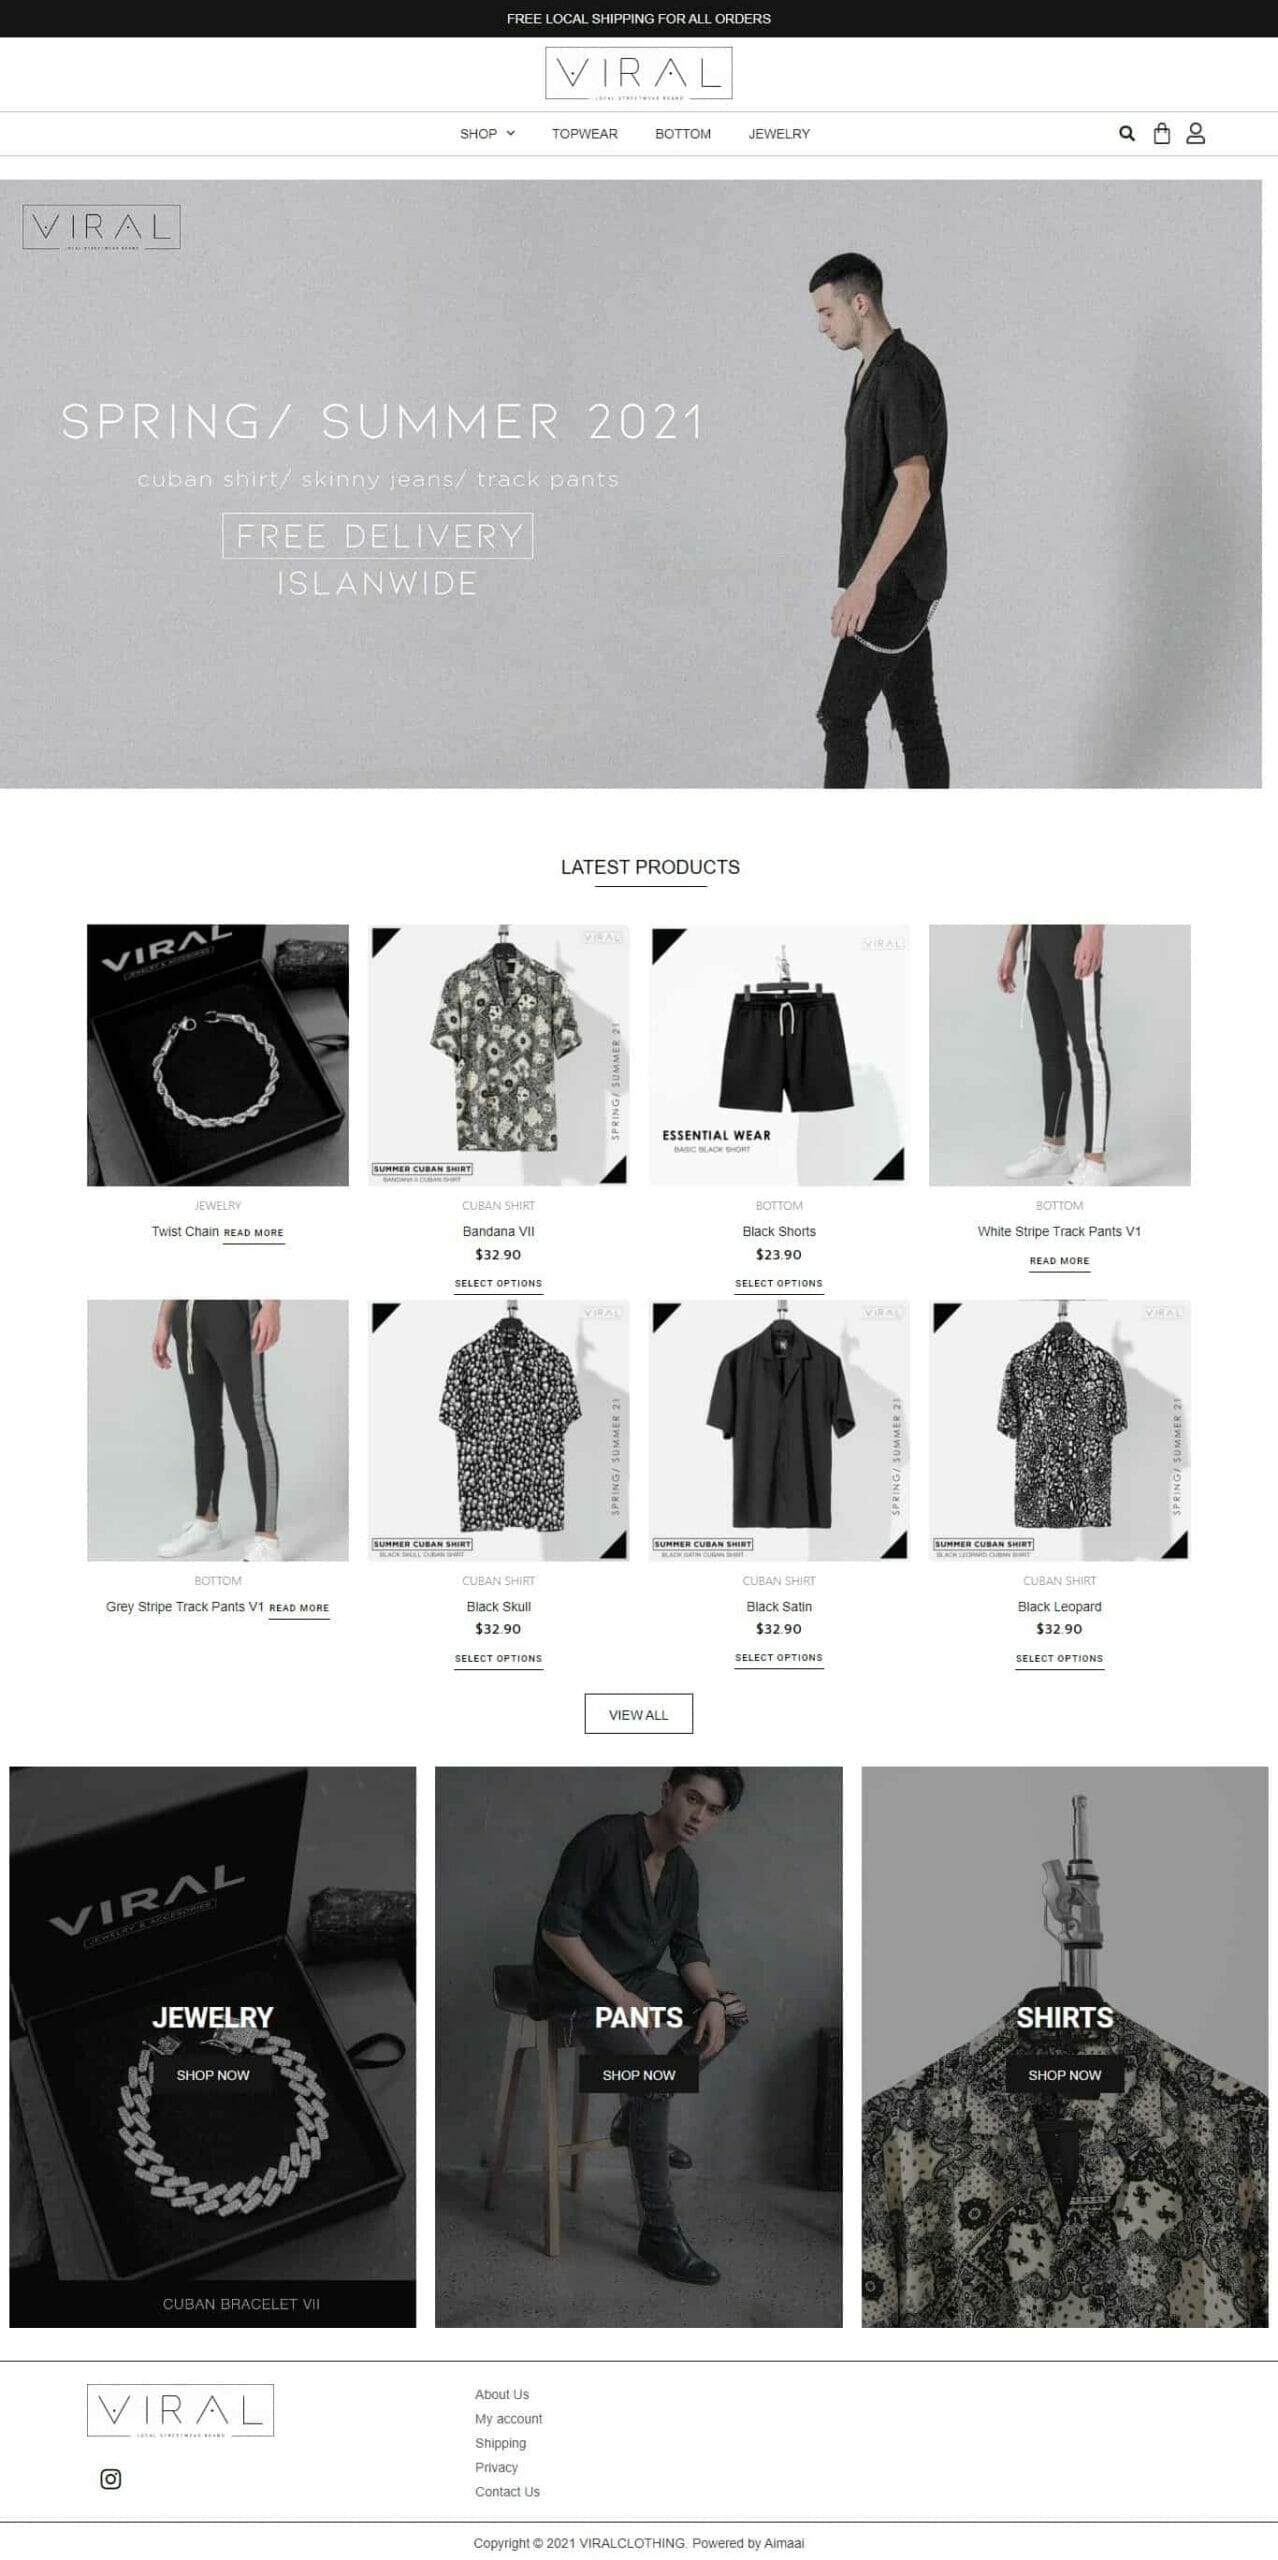 The online store for a men's clothing apparel, featuring a template-based web development.